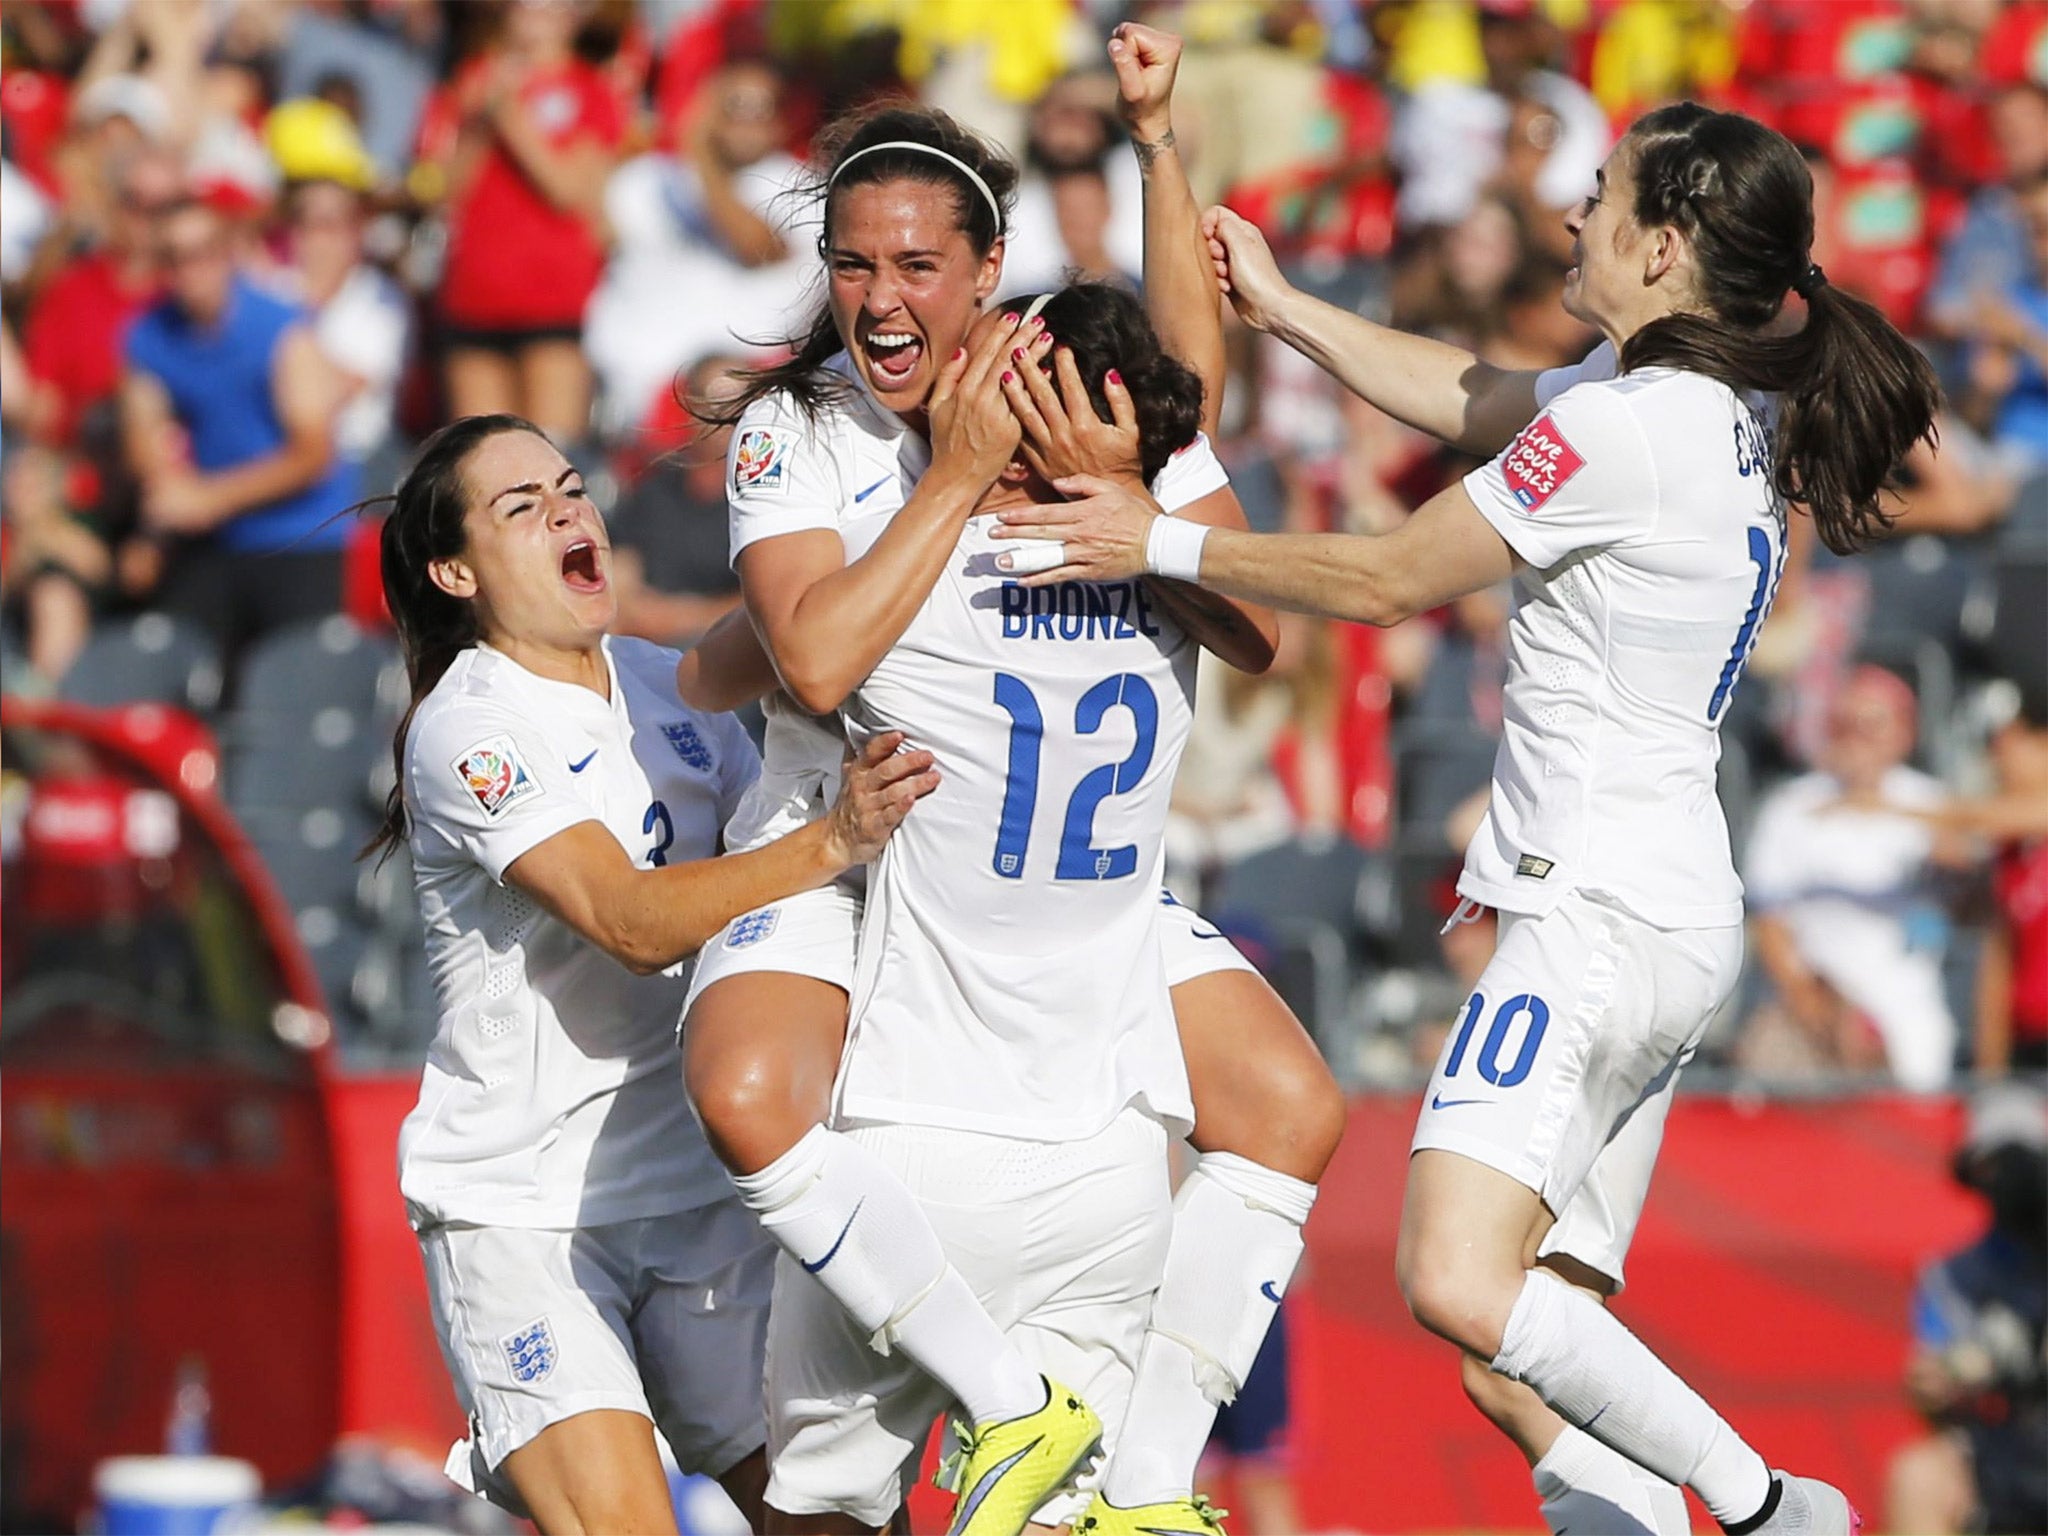 The England team celebrate after Lucy Bronze’s winning goal